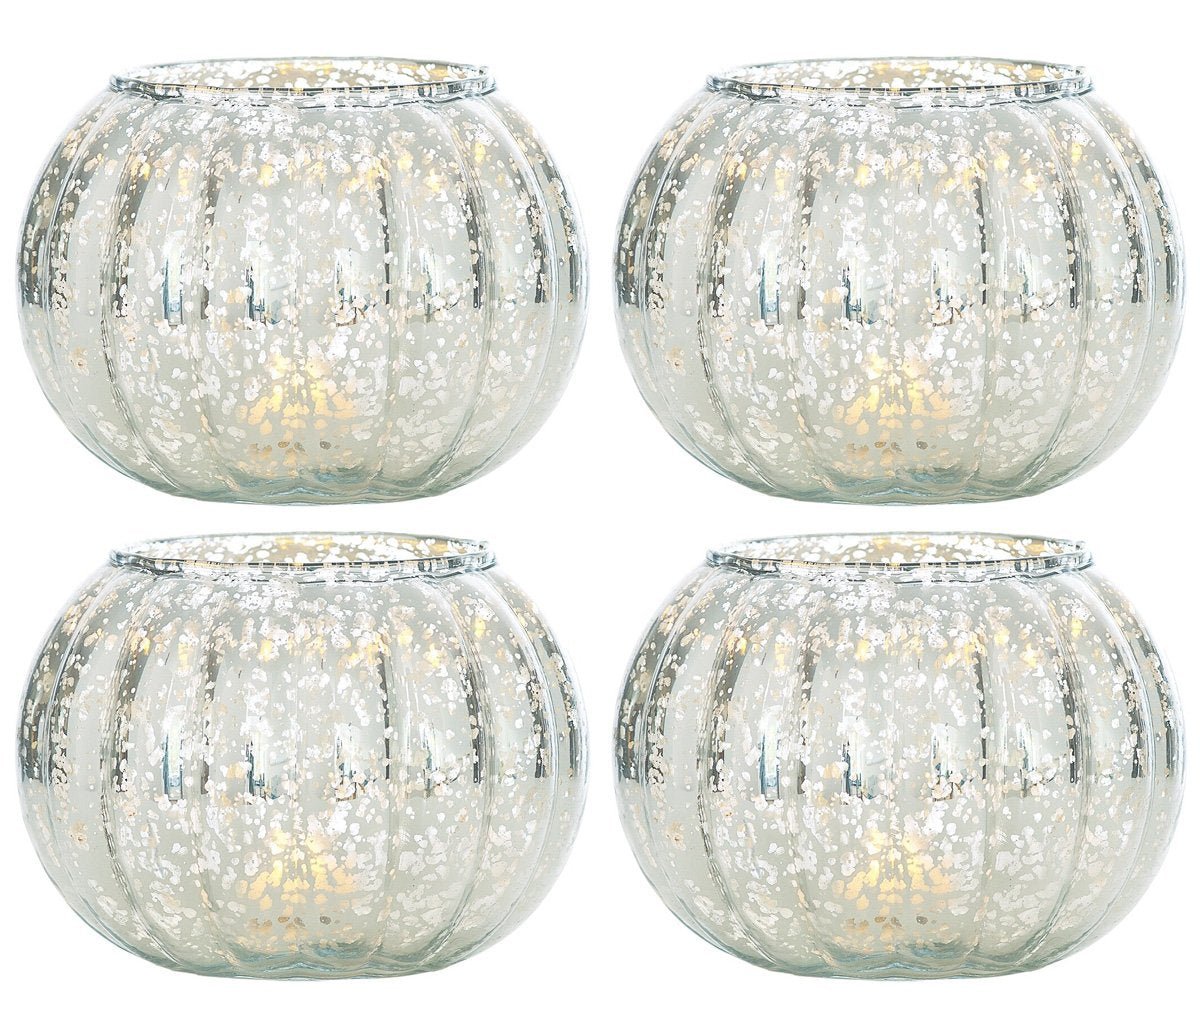 4-Pack Small Vintage Mercury Glass Candle Holder (3.5-Inch, Autumn Design, Silver) - For Home Decor, Party Decorations, and Wedding Centerpieces - Luna Bazaar | Boho &amp; Vintage Style Decor